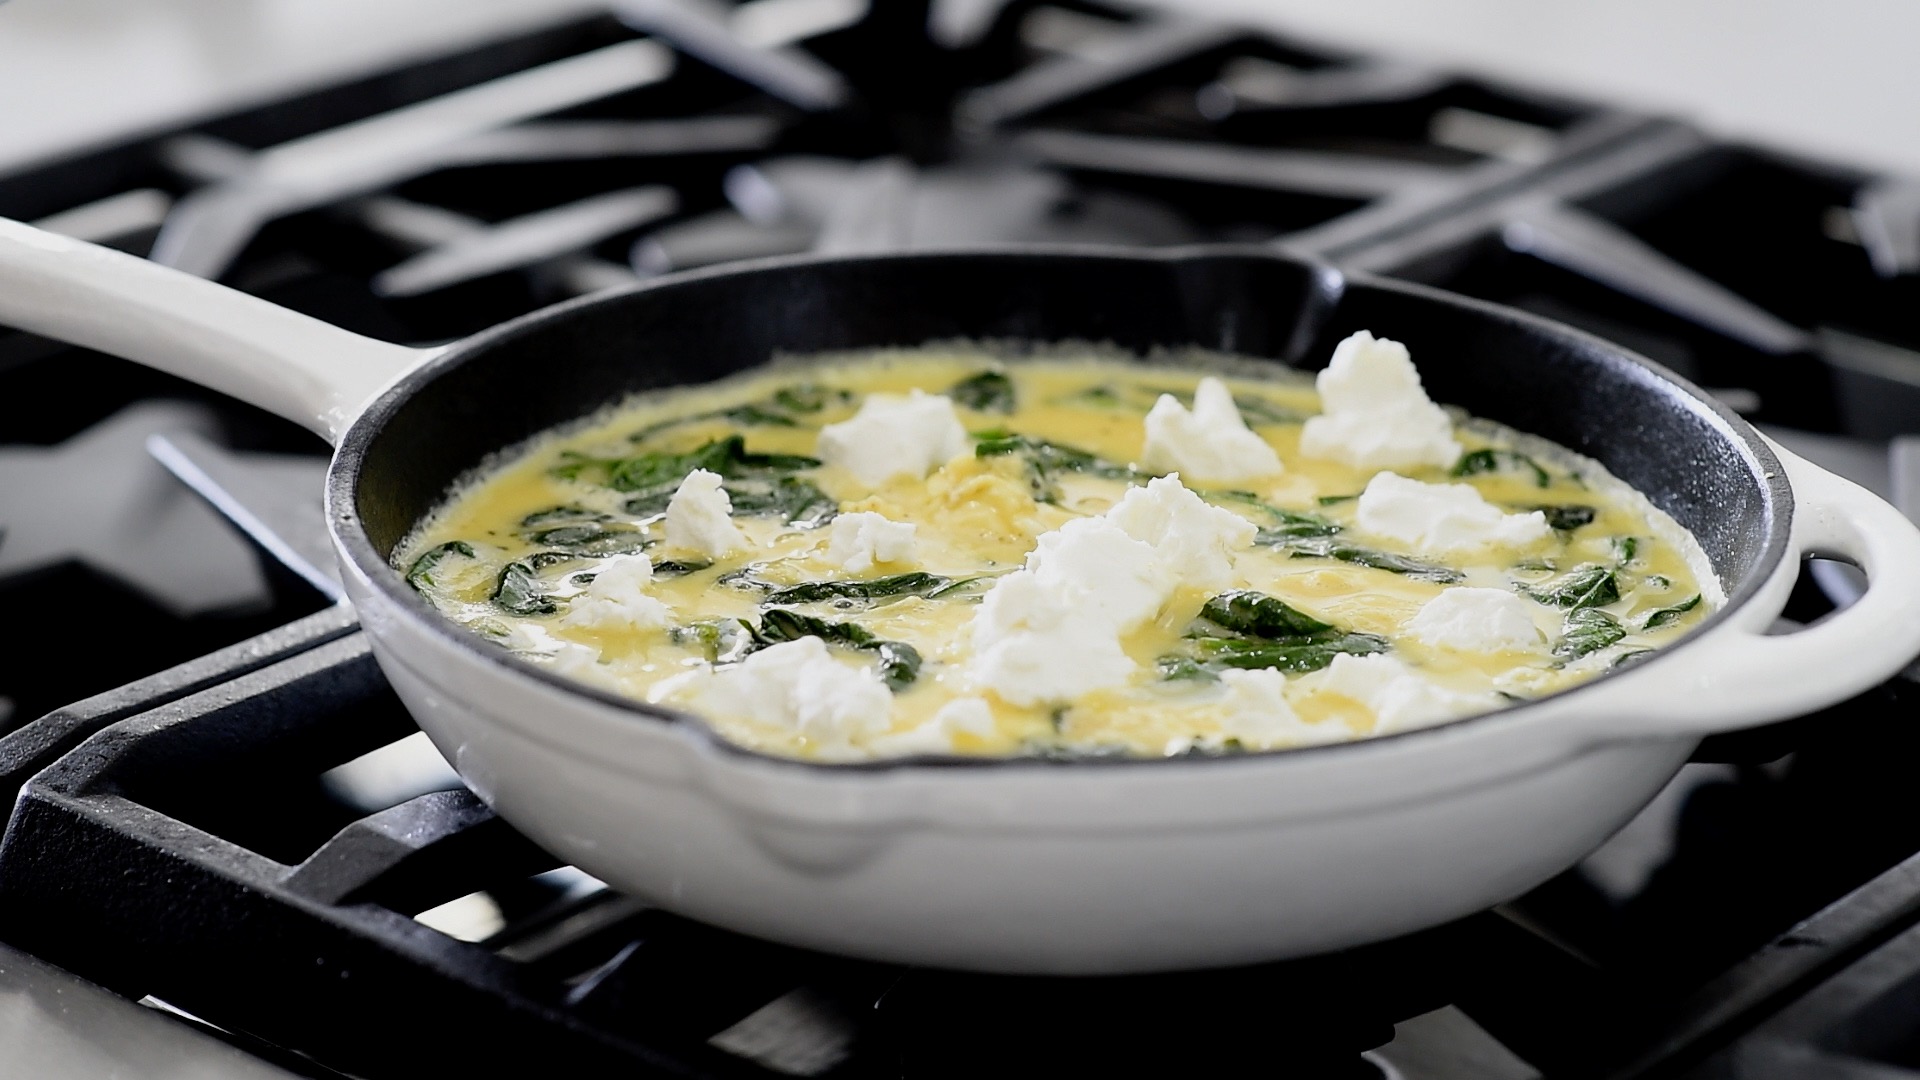 Thermador Home Appliance Blog | Mother’s Day Treats: Spinach & Goat ...